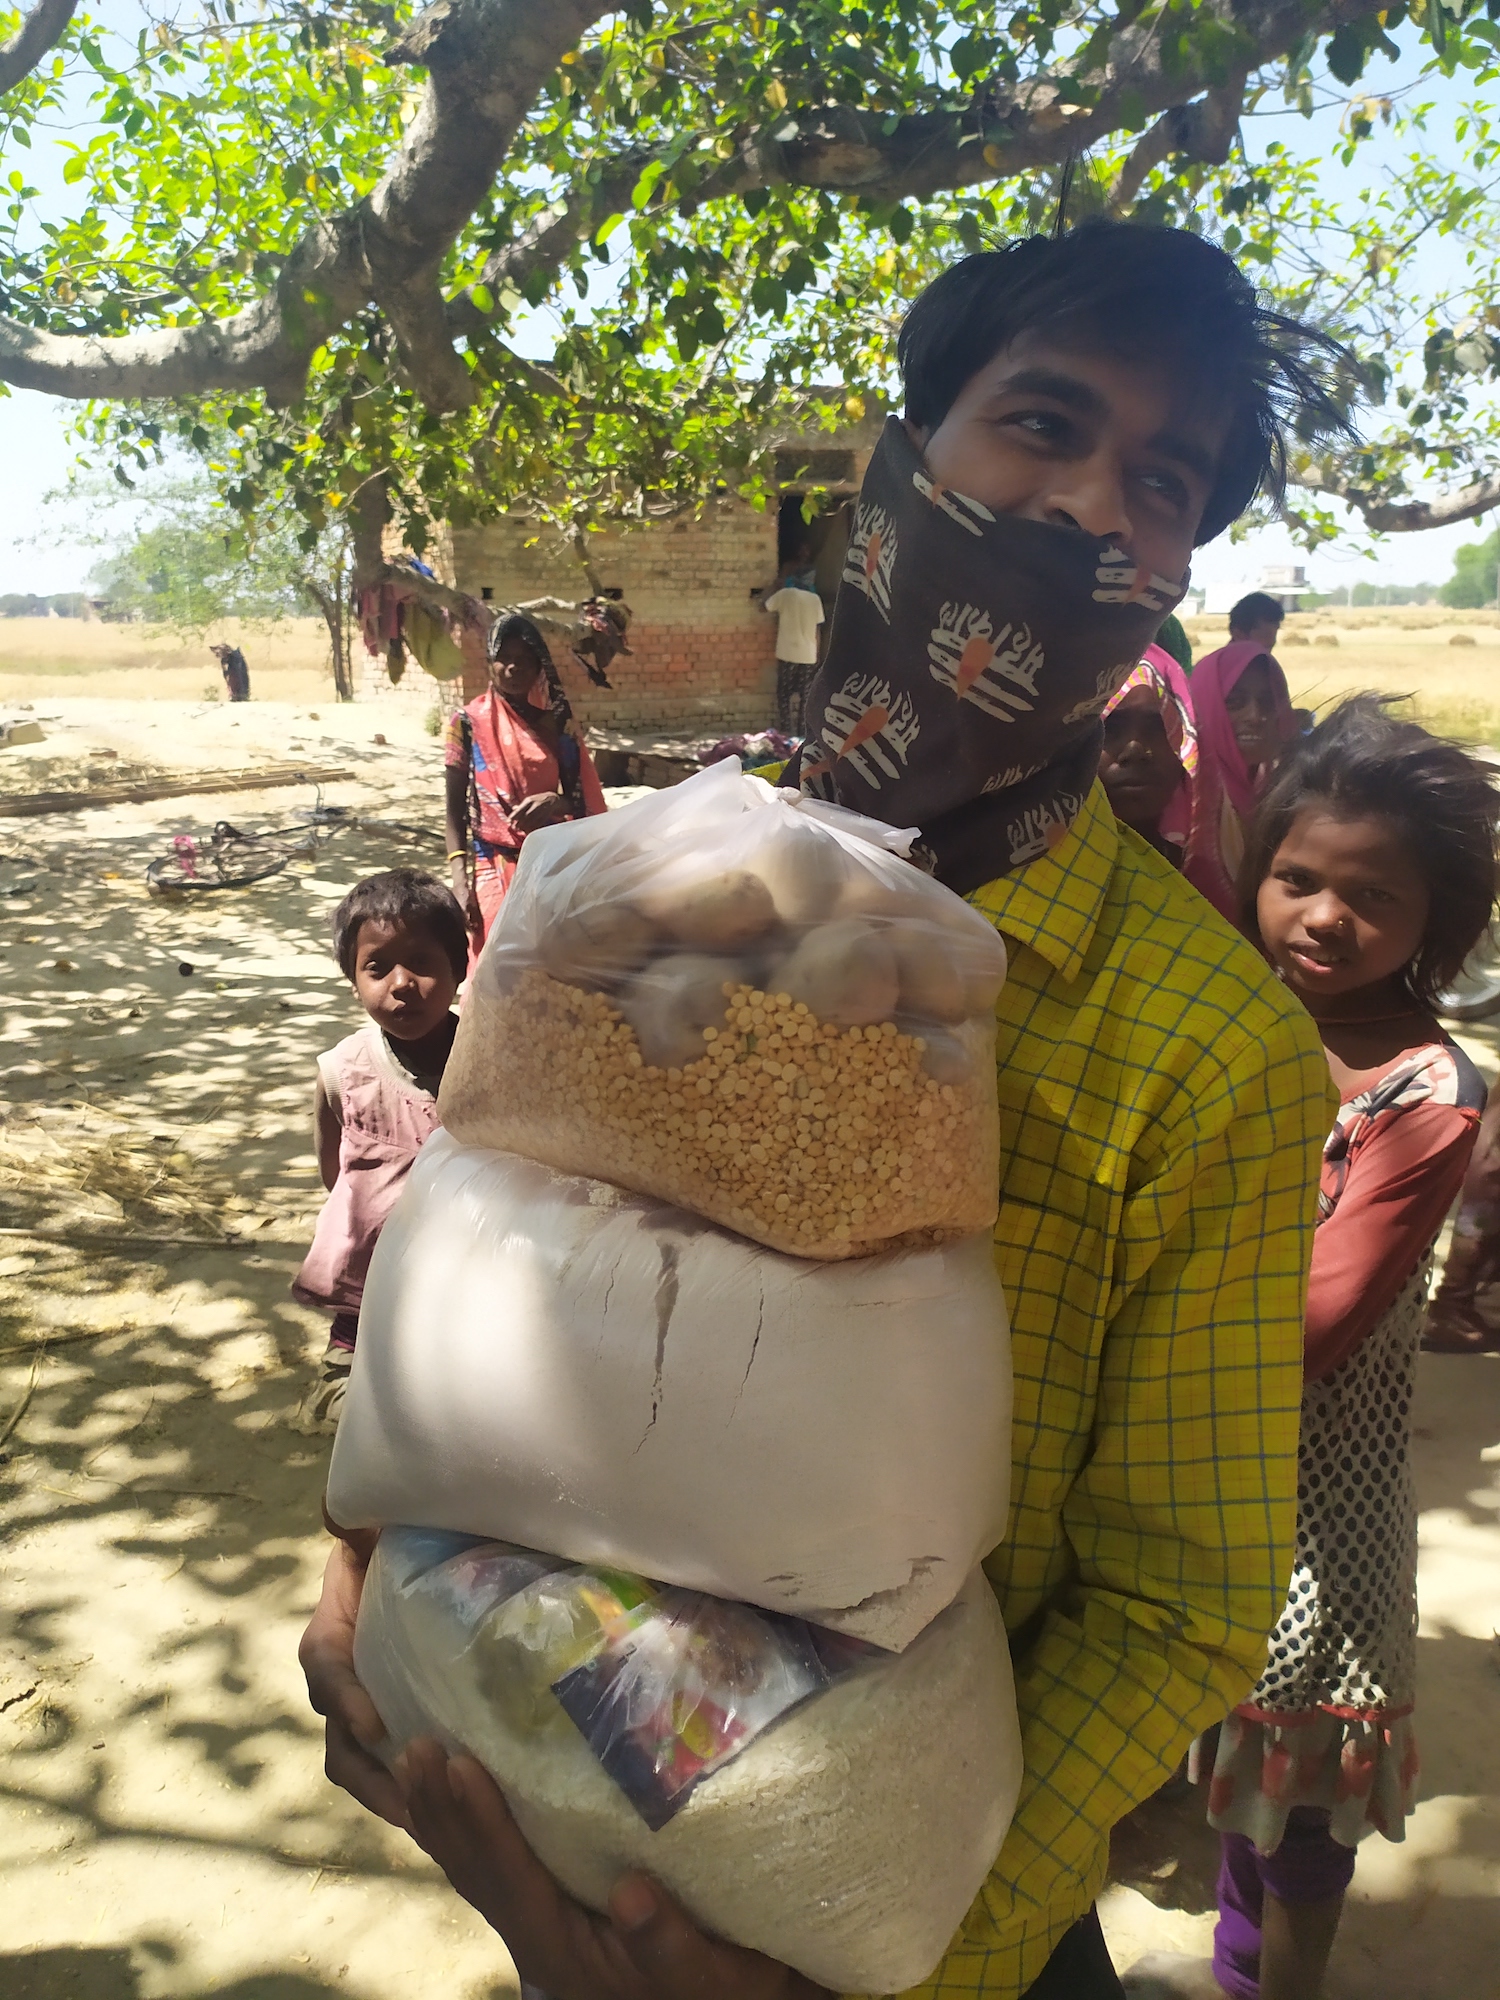 Person with bandana over face holds a bag of food and smiles with children in backgroud